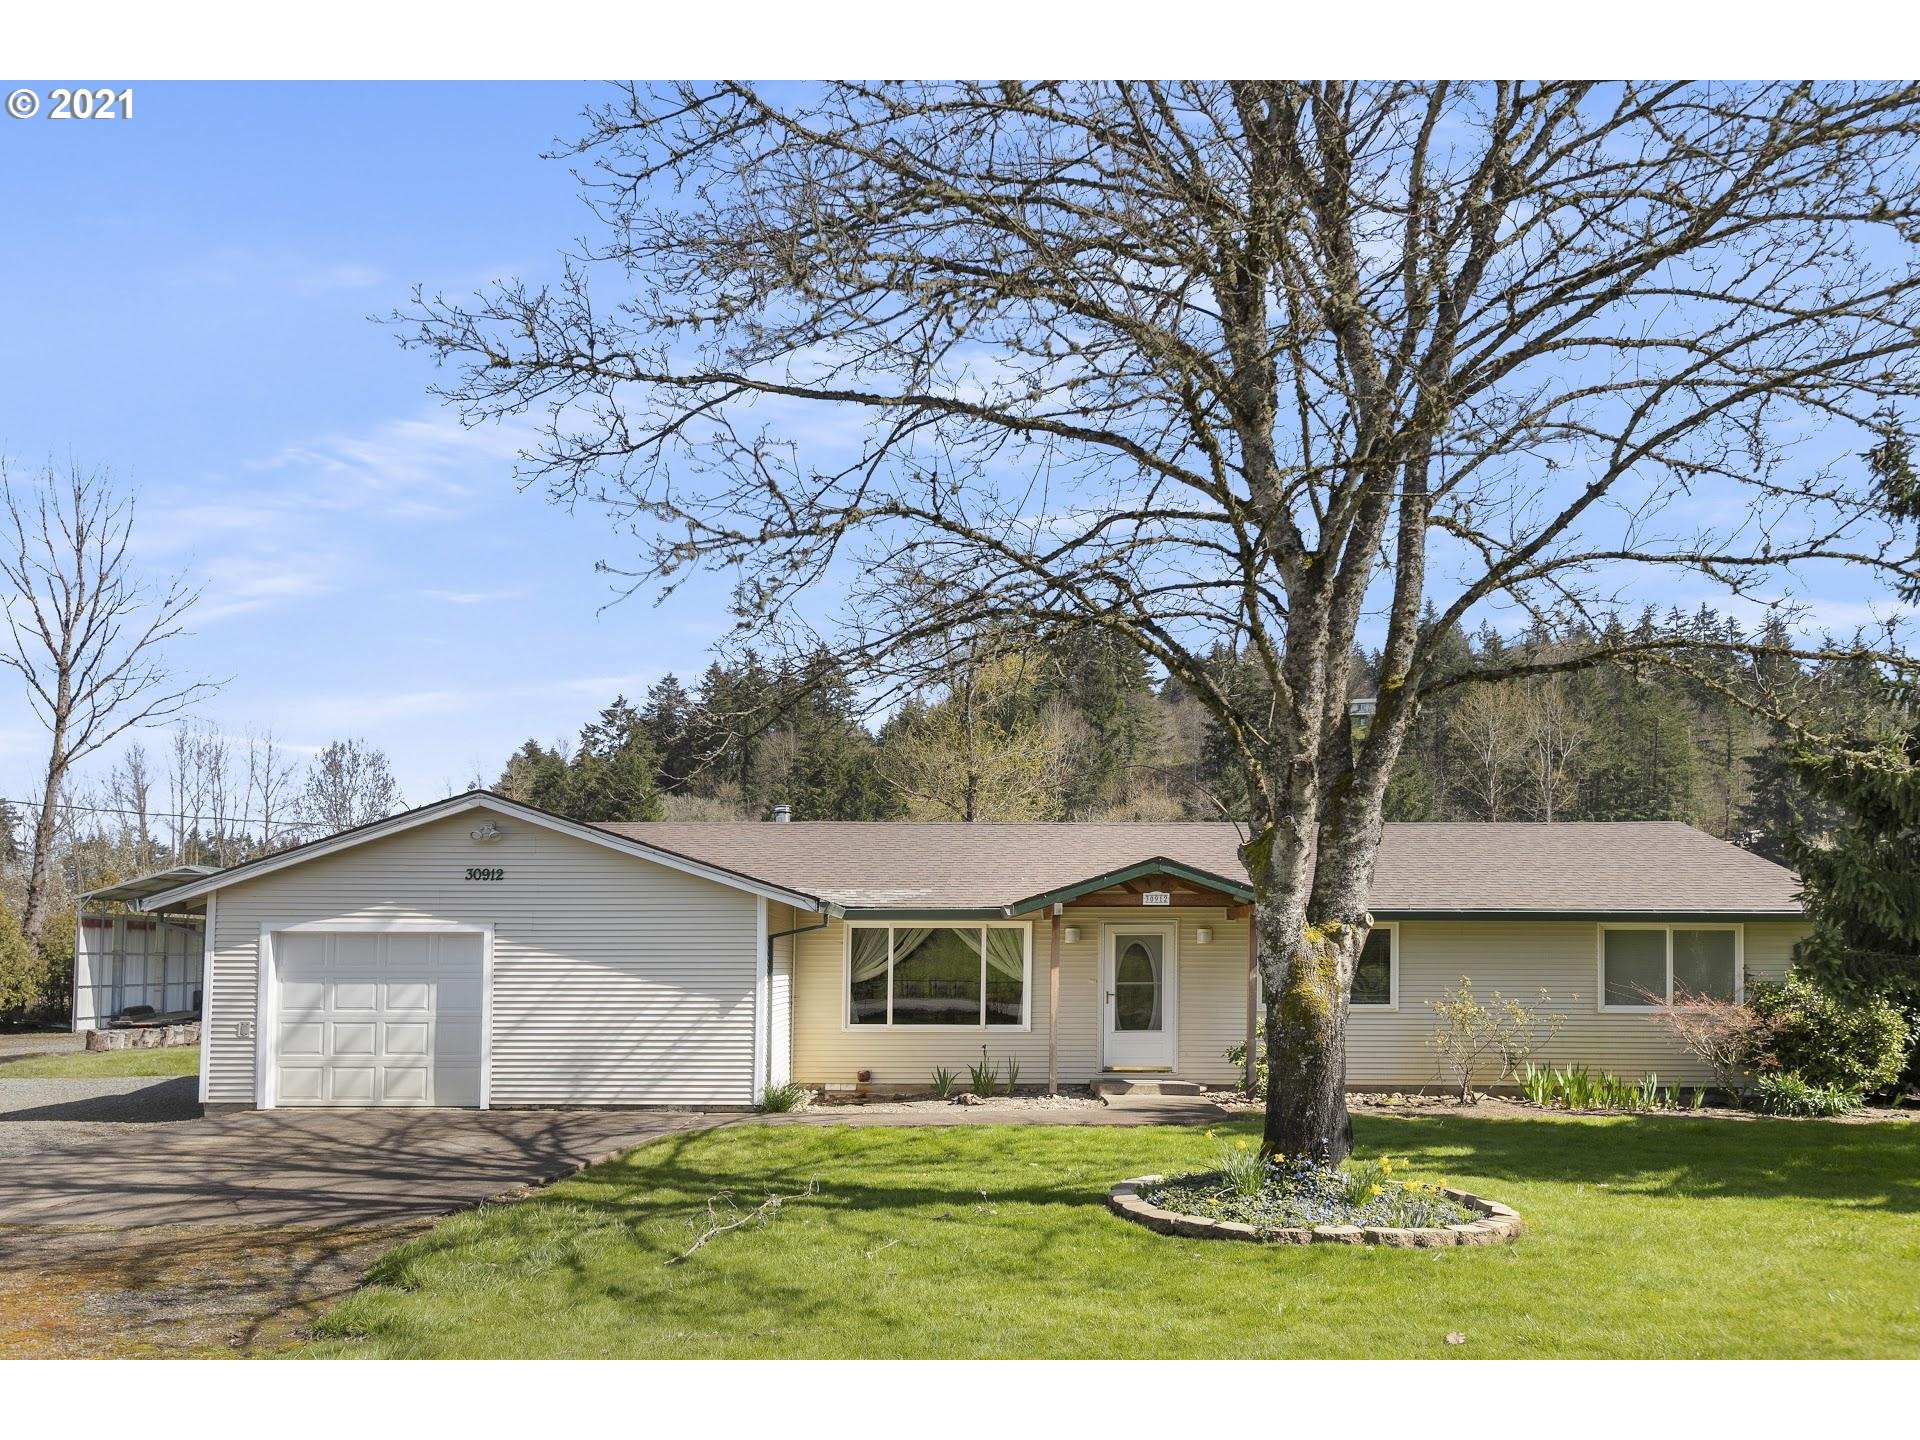 30912 S WRIGHT RD (1 of 32)